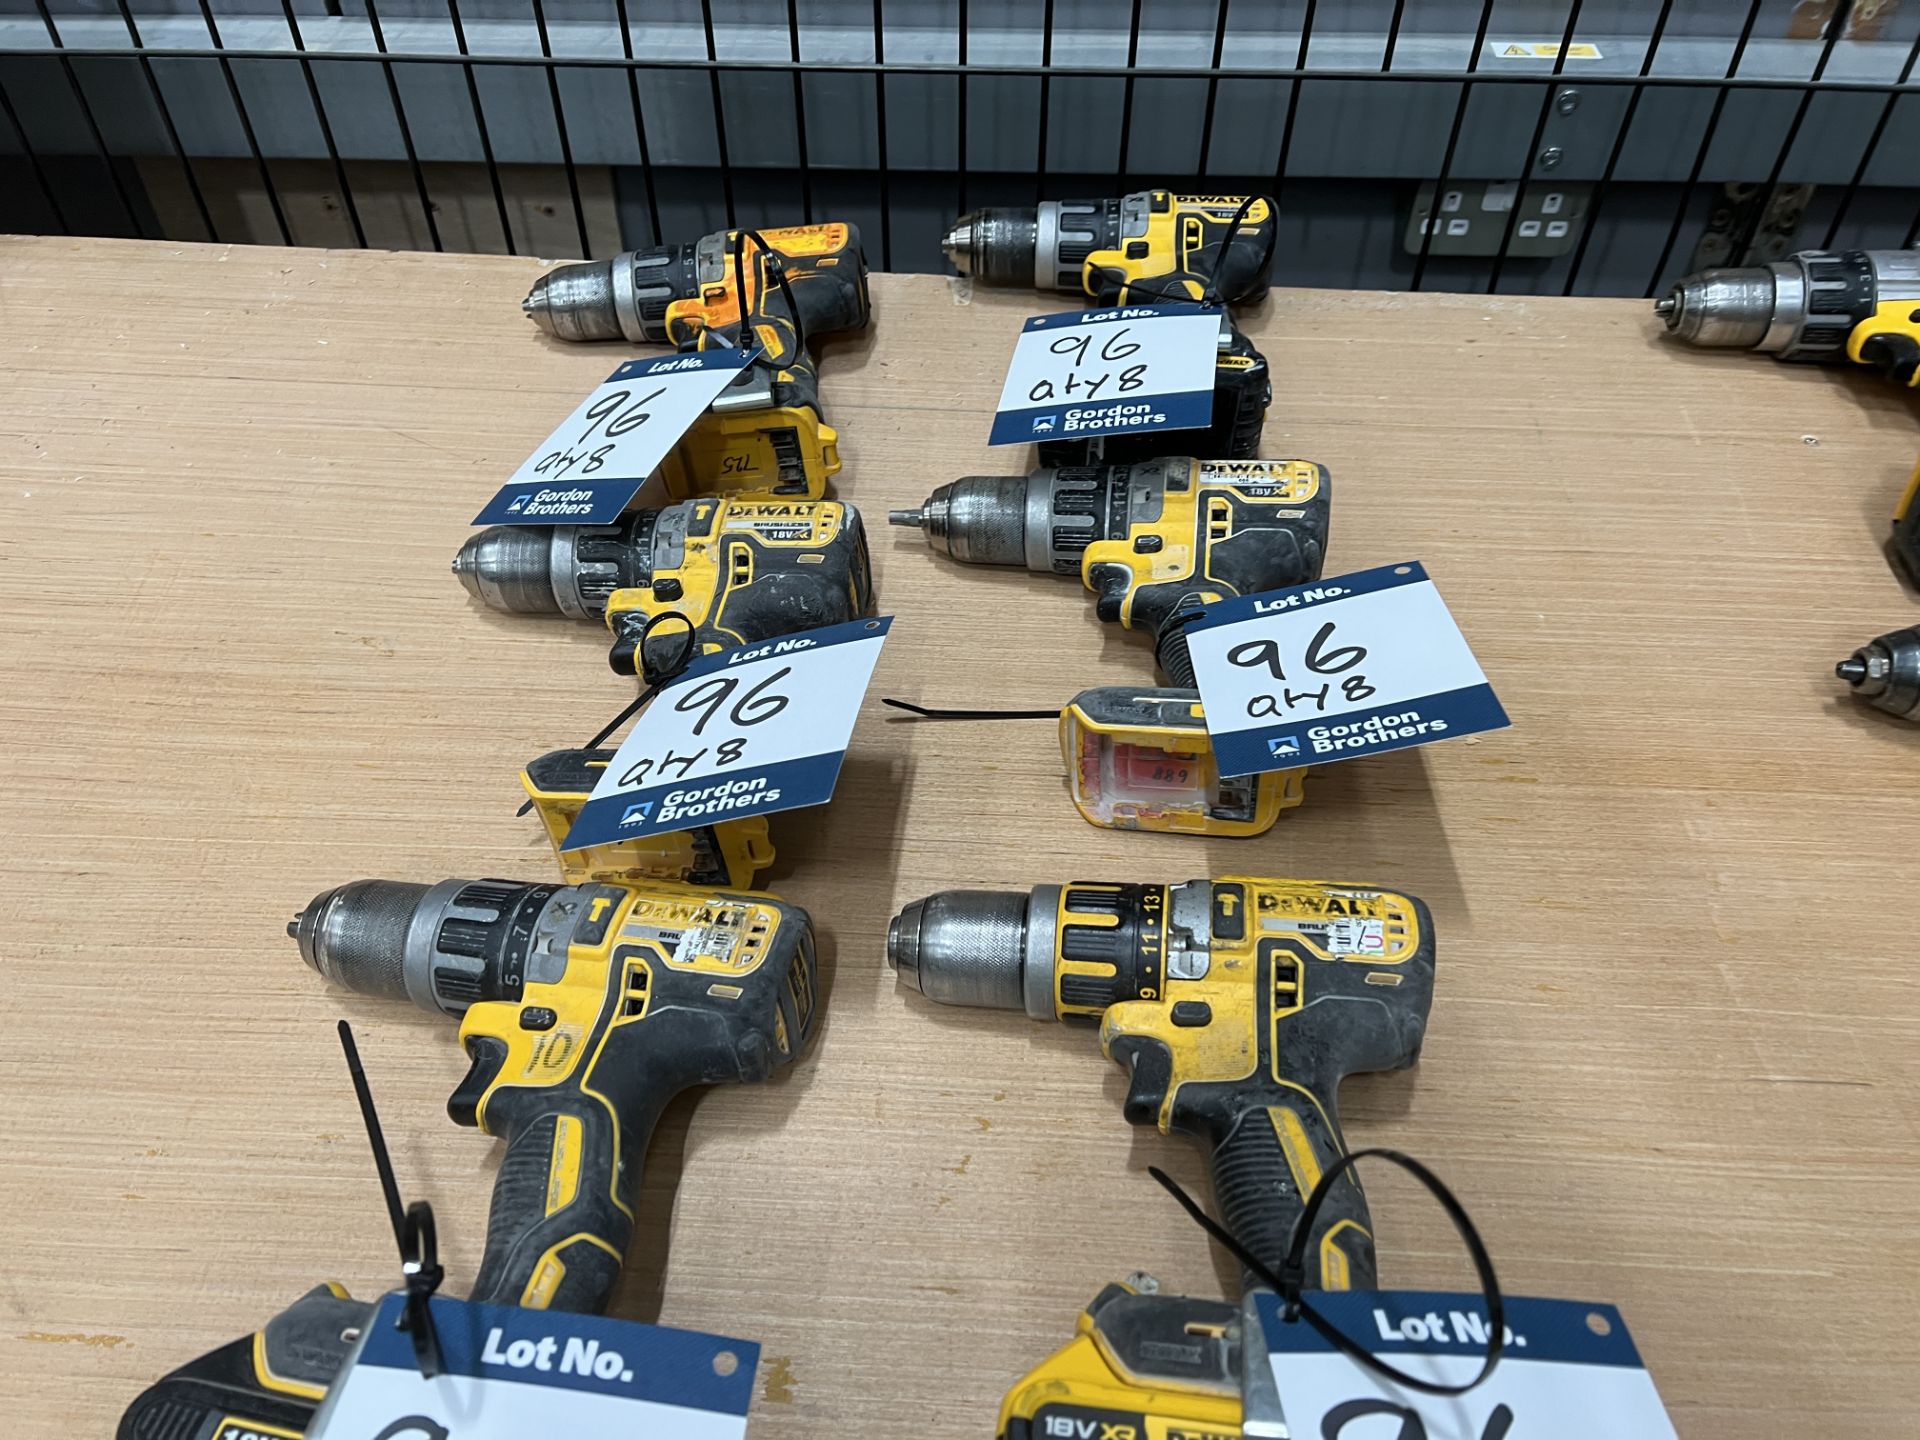 8x (no.) DeWalt, DCD796 18v battery hammer drills with 4x batteries, 2AH and 2 DCB 113 chargers - Image 2 of 6